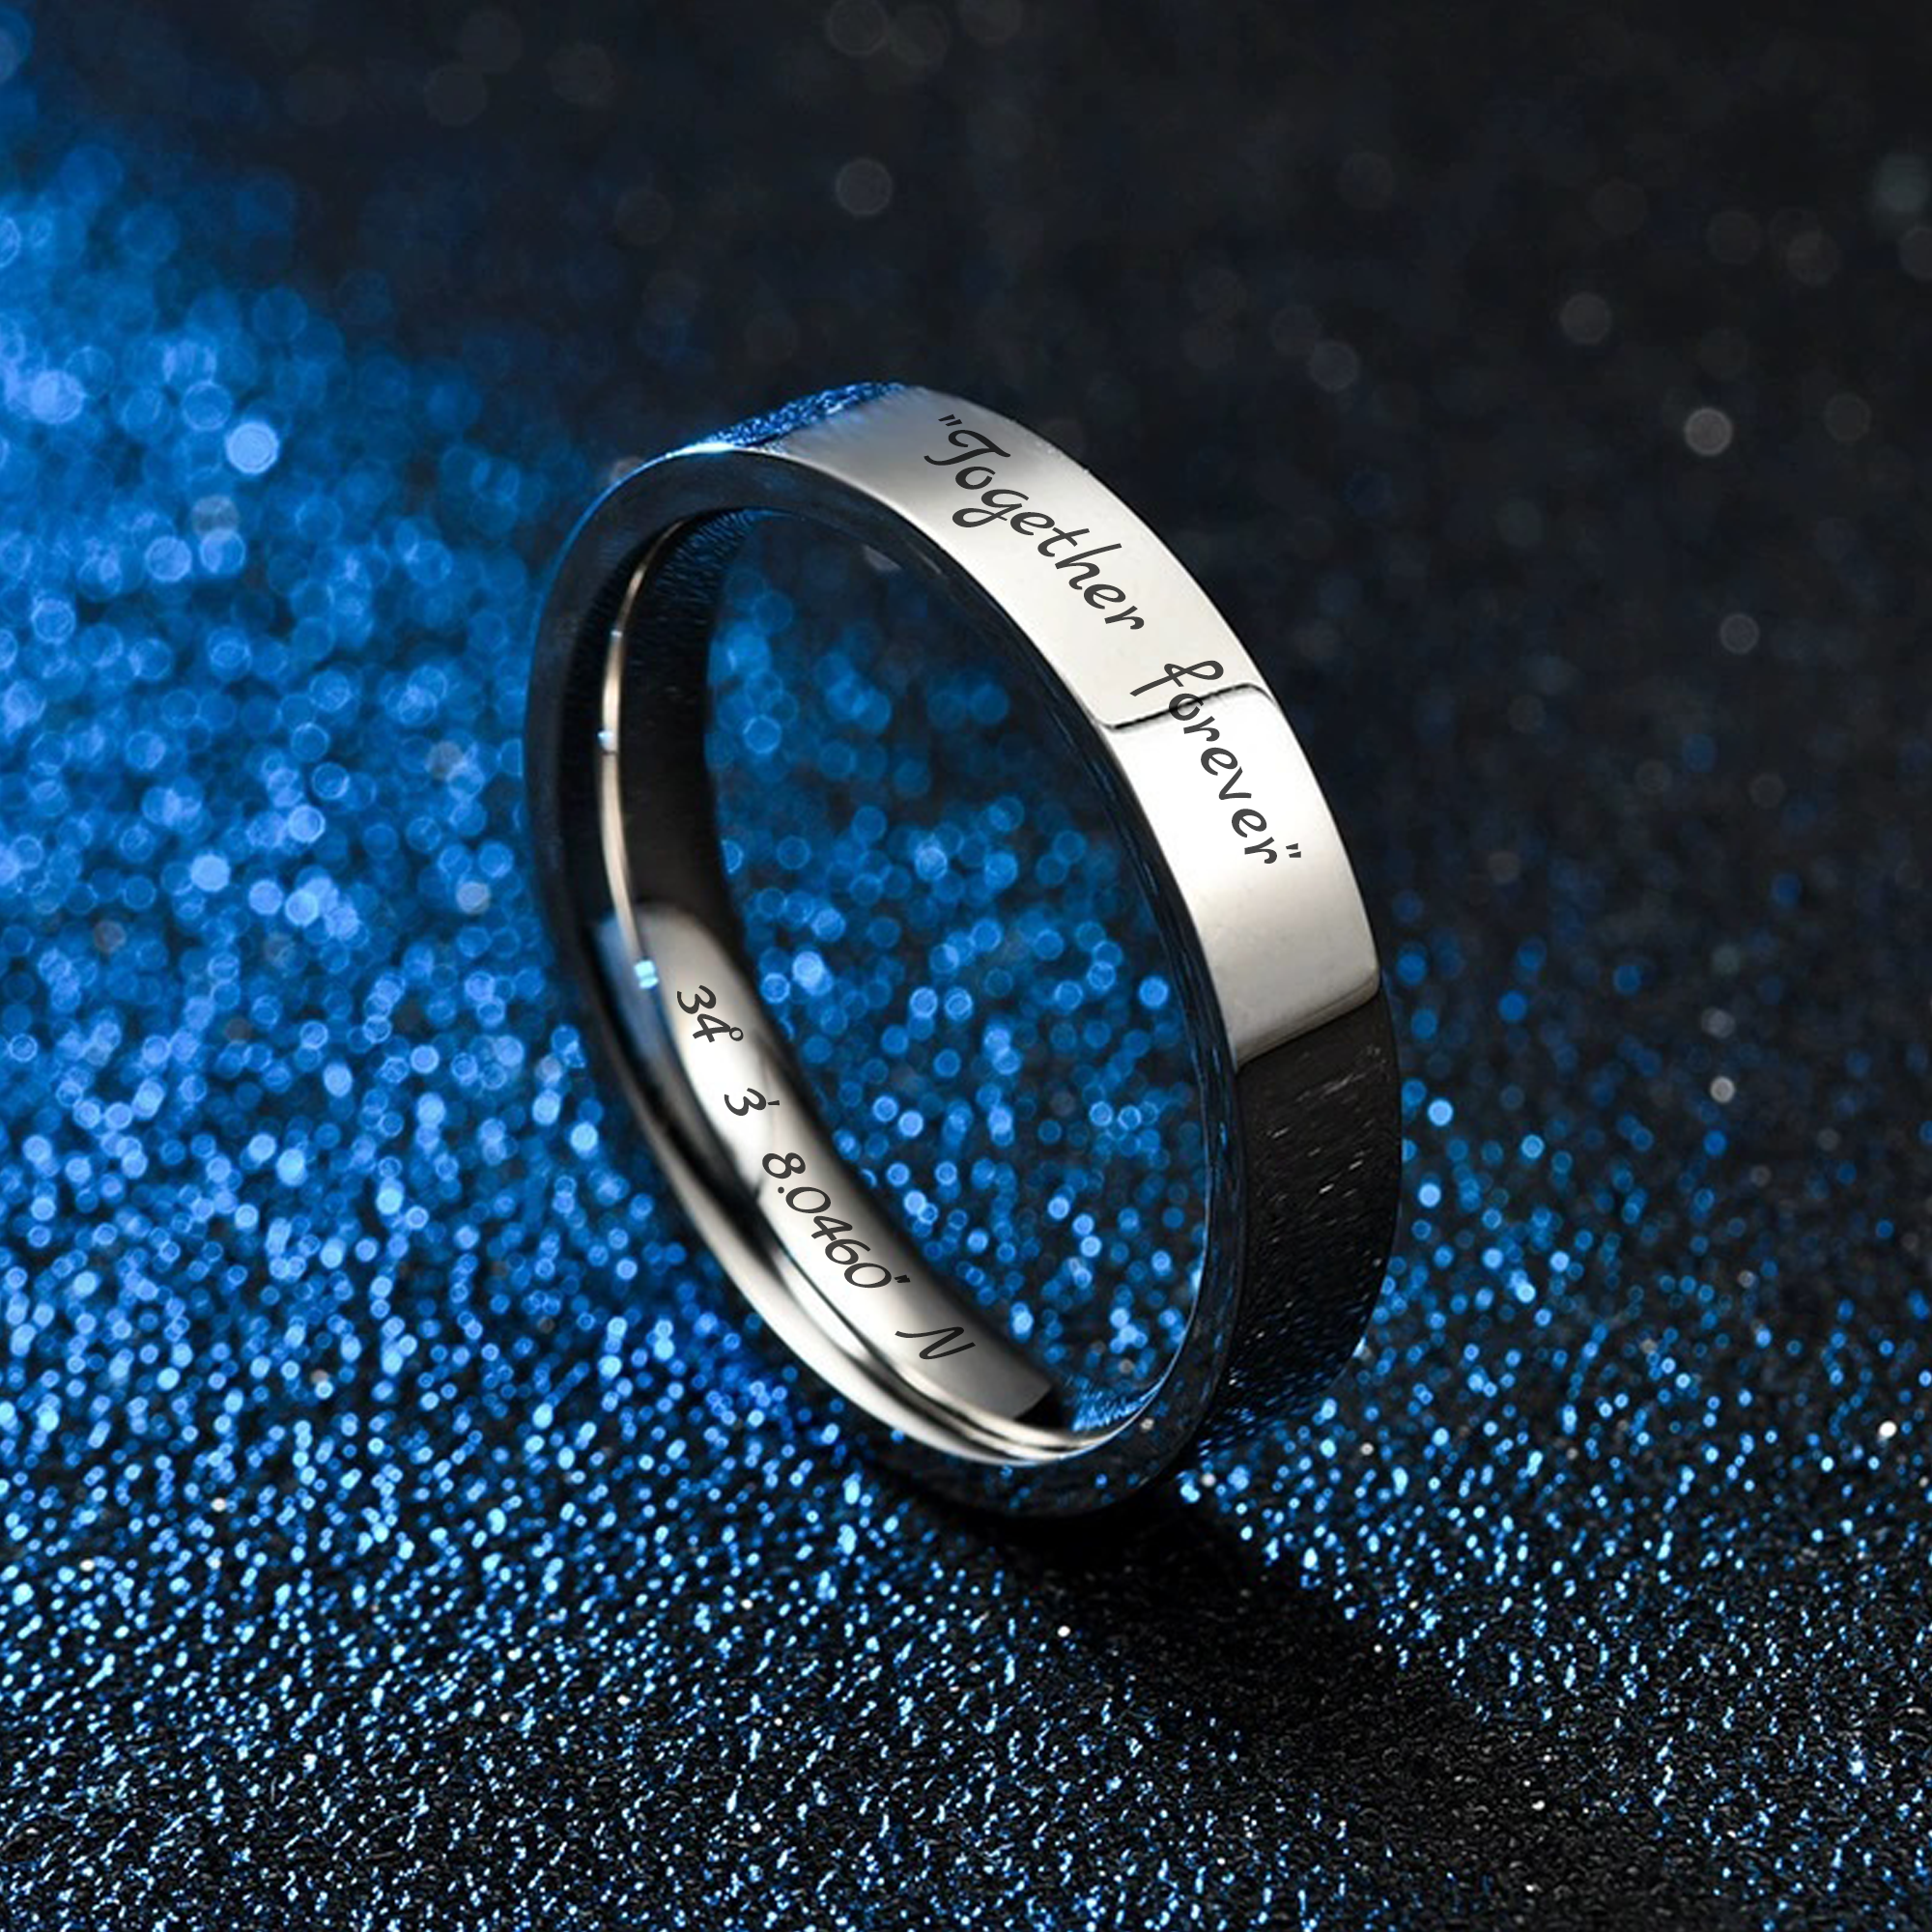 Classic Engraved Rings 4 MM KCLR 1